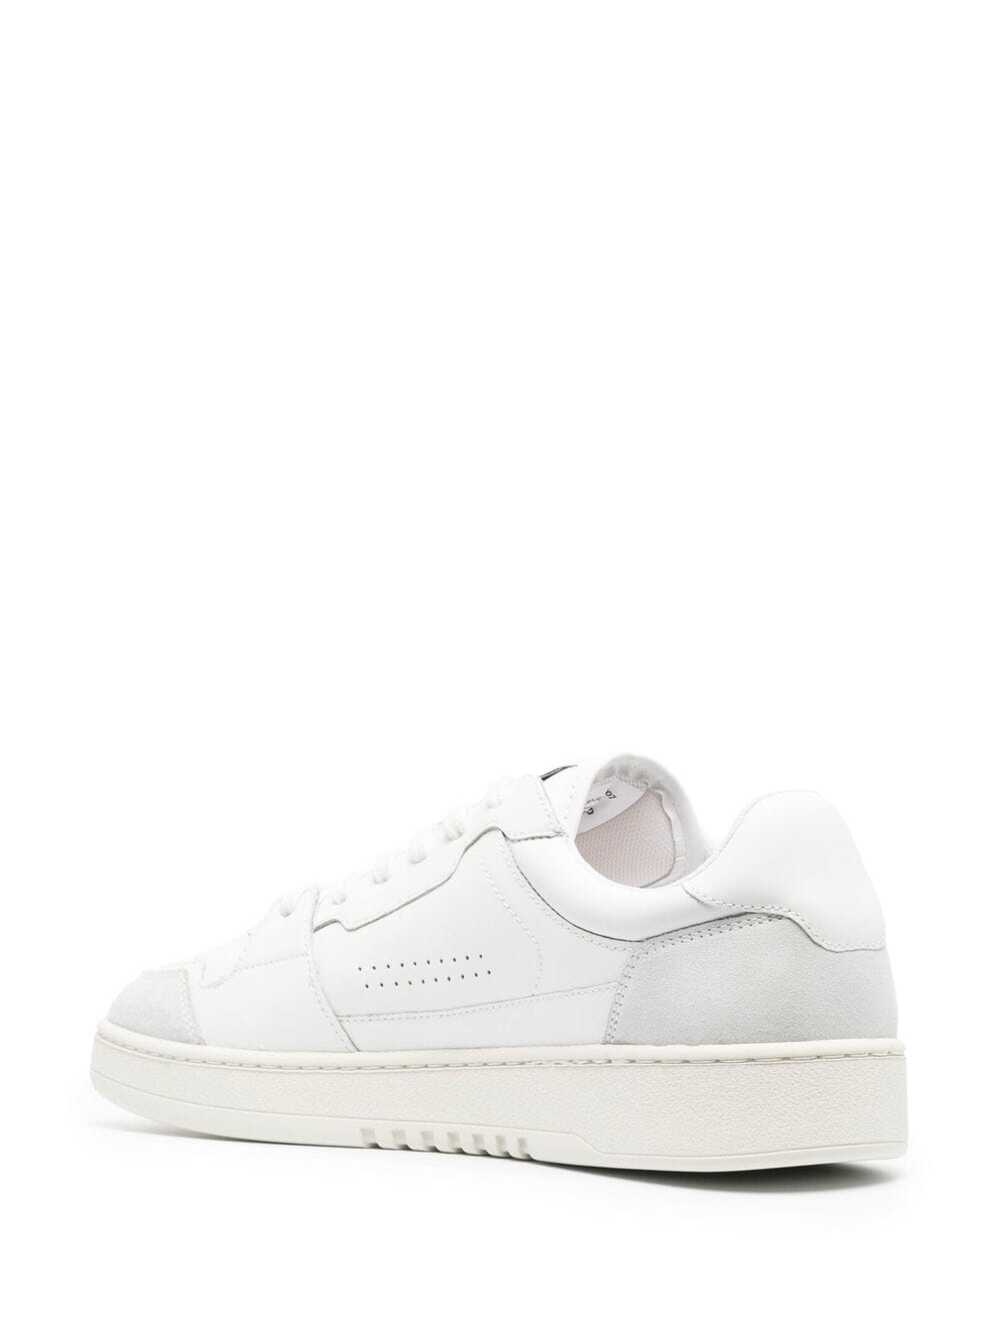 Shop Axel Arigato Dice Lo White Low Top Sneakers With Suede Details And Logo In Leather Man